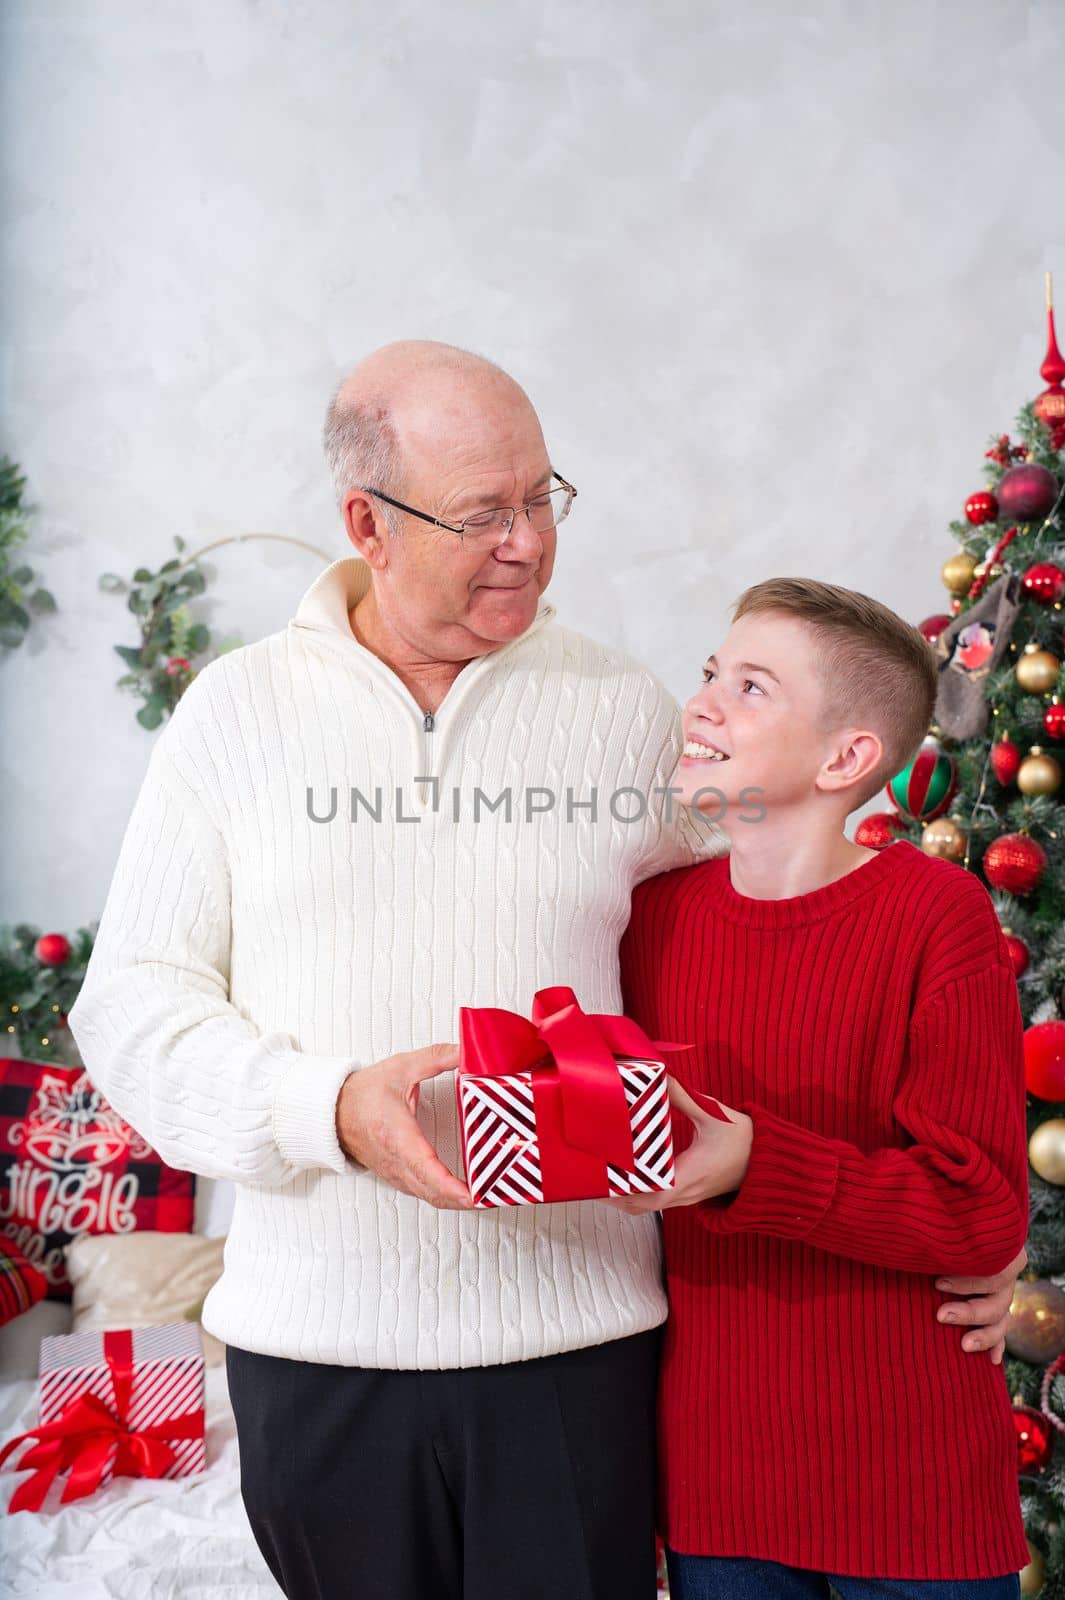 Happy Grandson giving grandpa a Christmas present. Cute little boy is giving his father a gift and smiling. Christmas wonder.